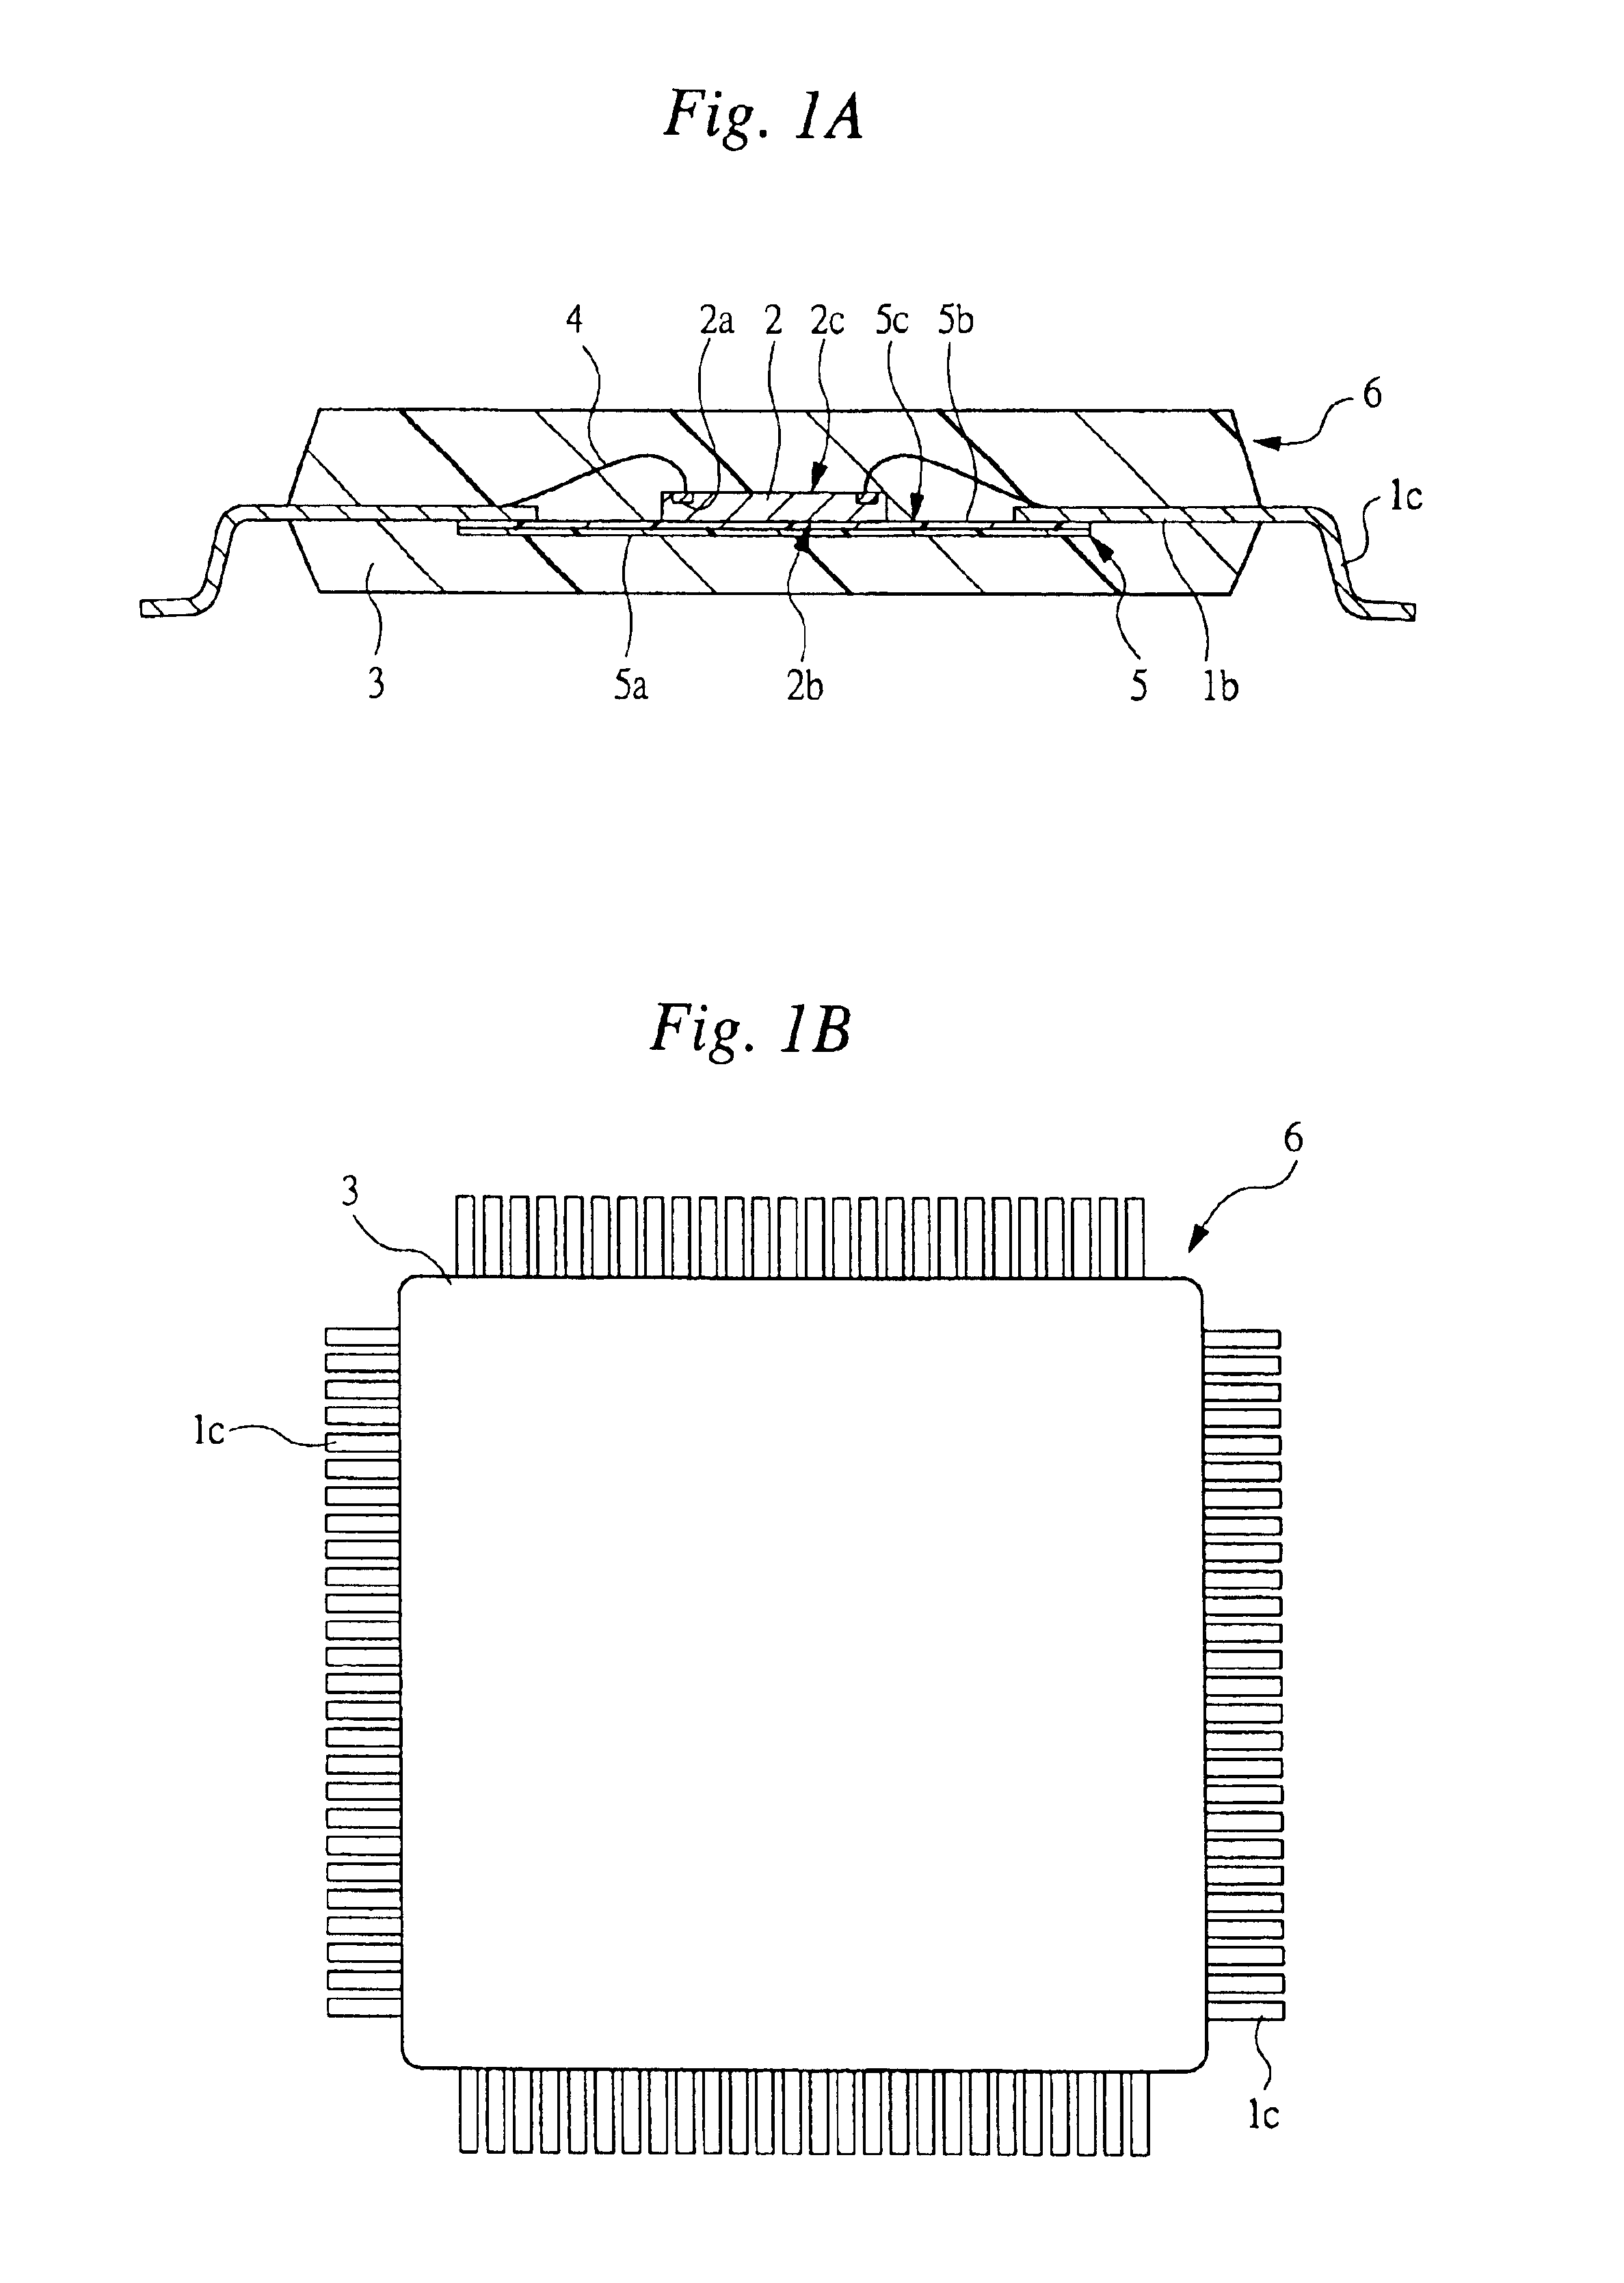 Method of manufacturing a semiconductor device having leads stabilized during die mounting